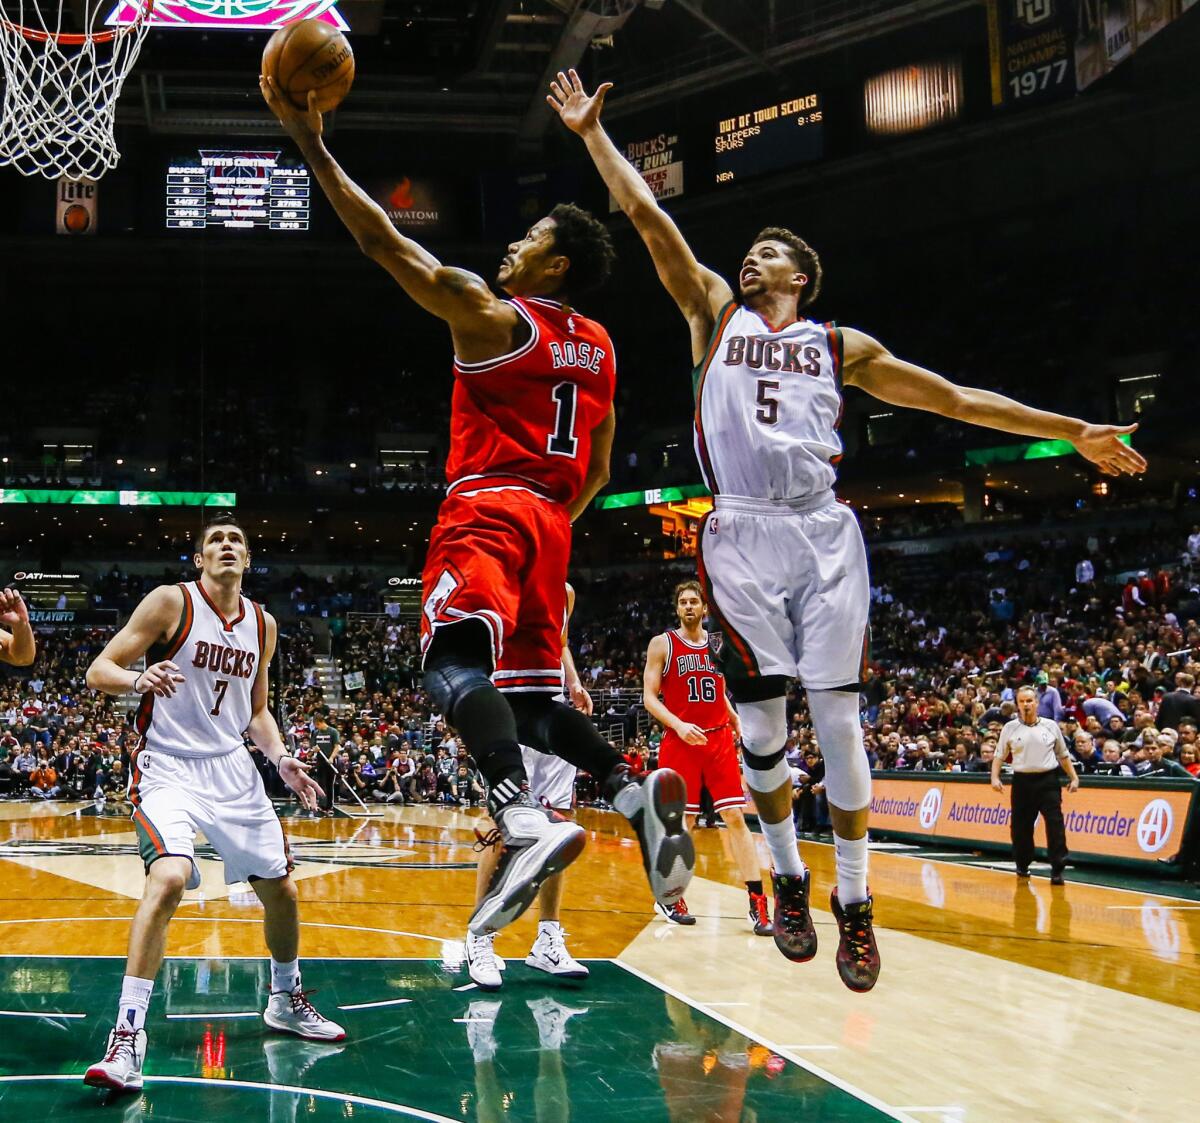 Bulls guard Derrick Rose goes by Bucks point guard Michael Carter-Williams. The Bulls routed Milwaukee by 54 points.